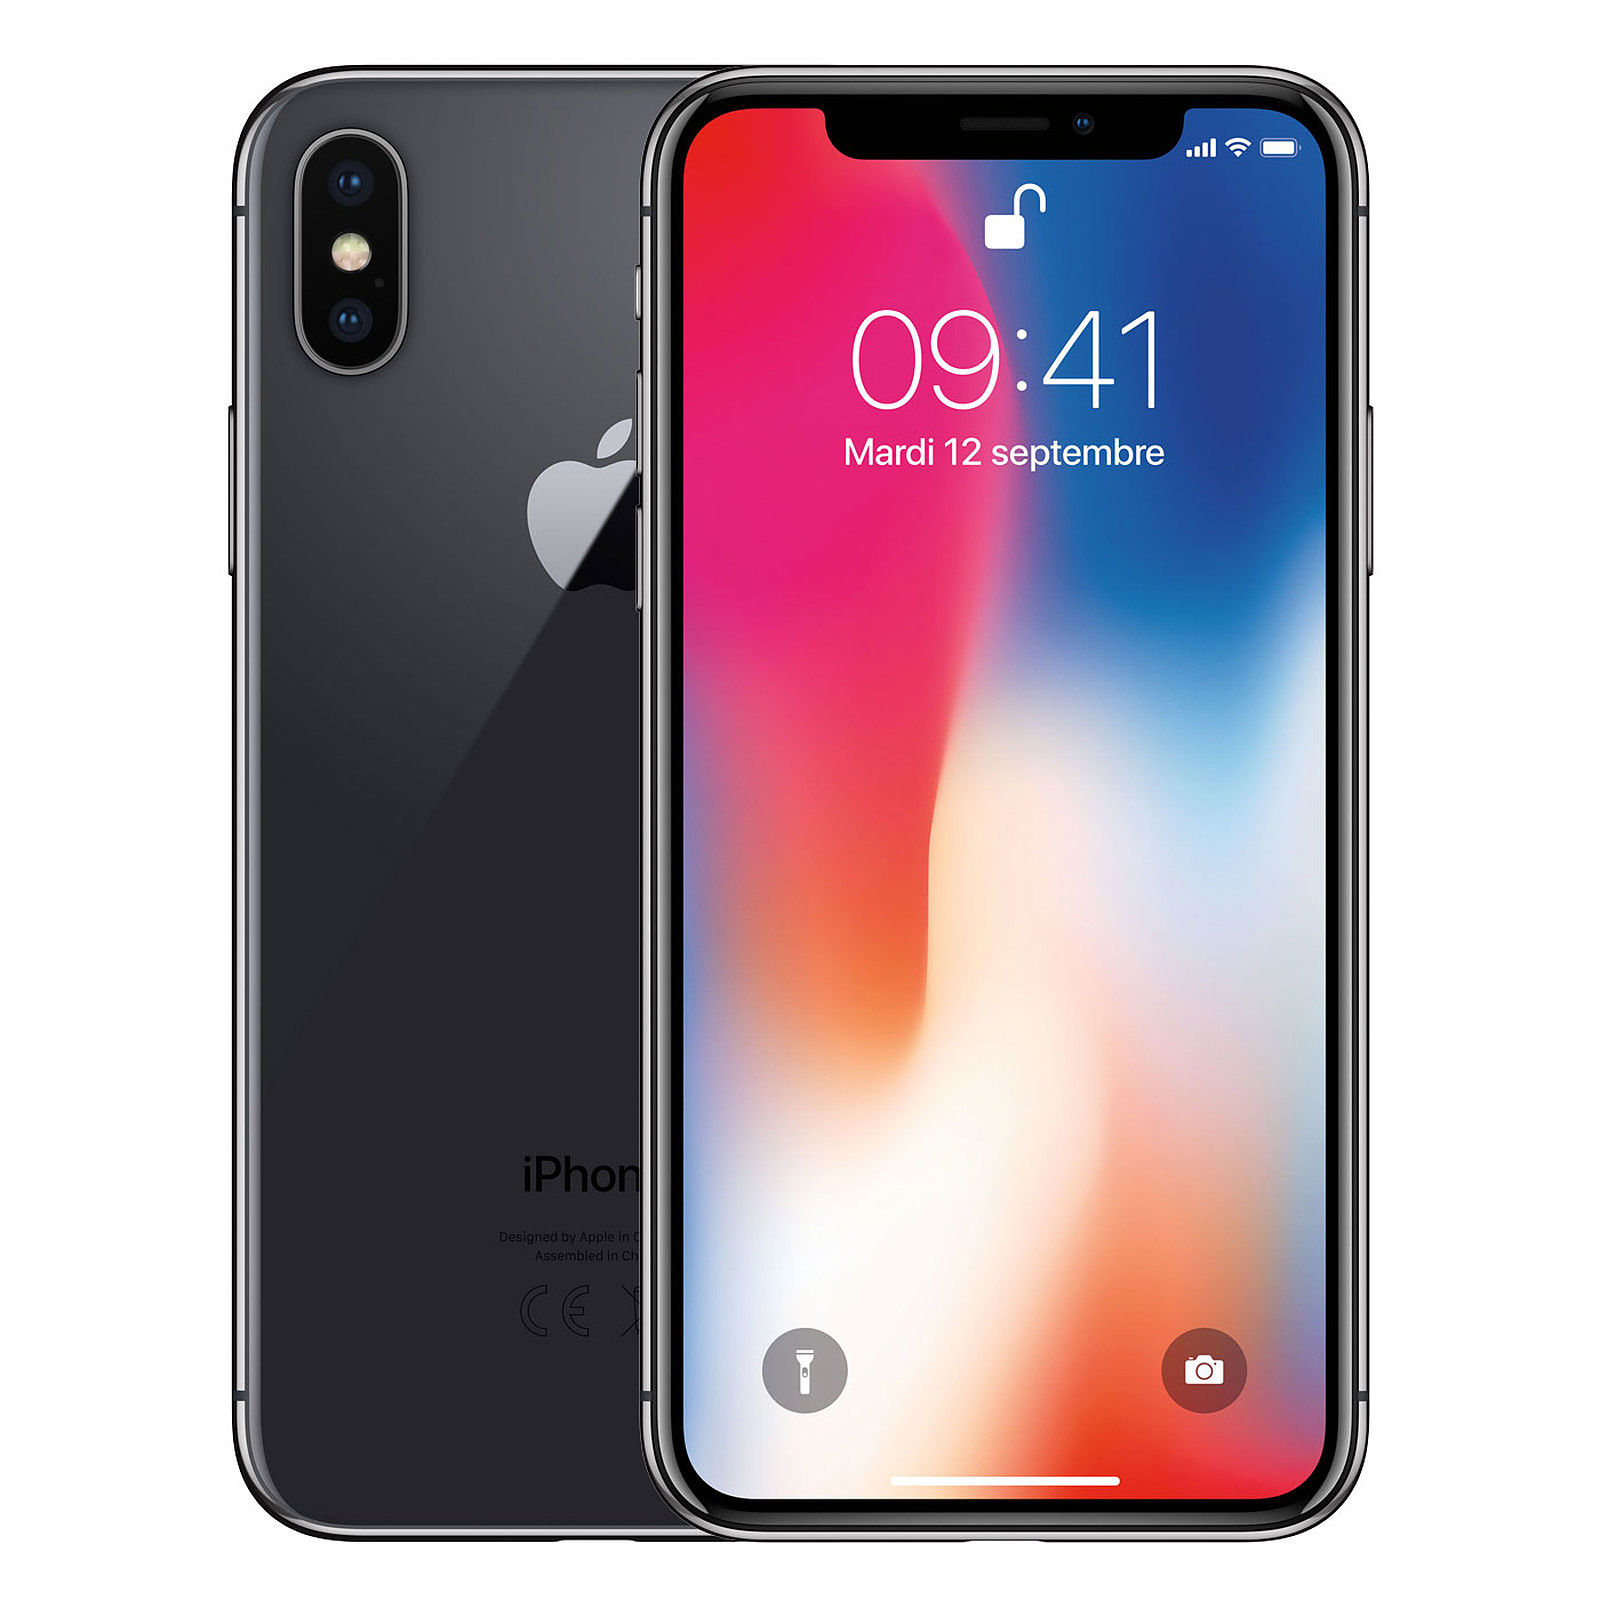 Smartphone Iphone X 64Gb occasion reconditionné à neuf Grade A+ Space